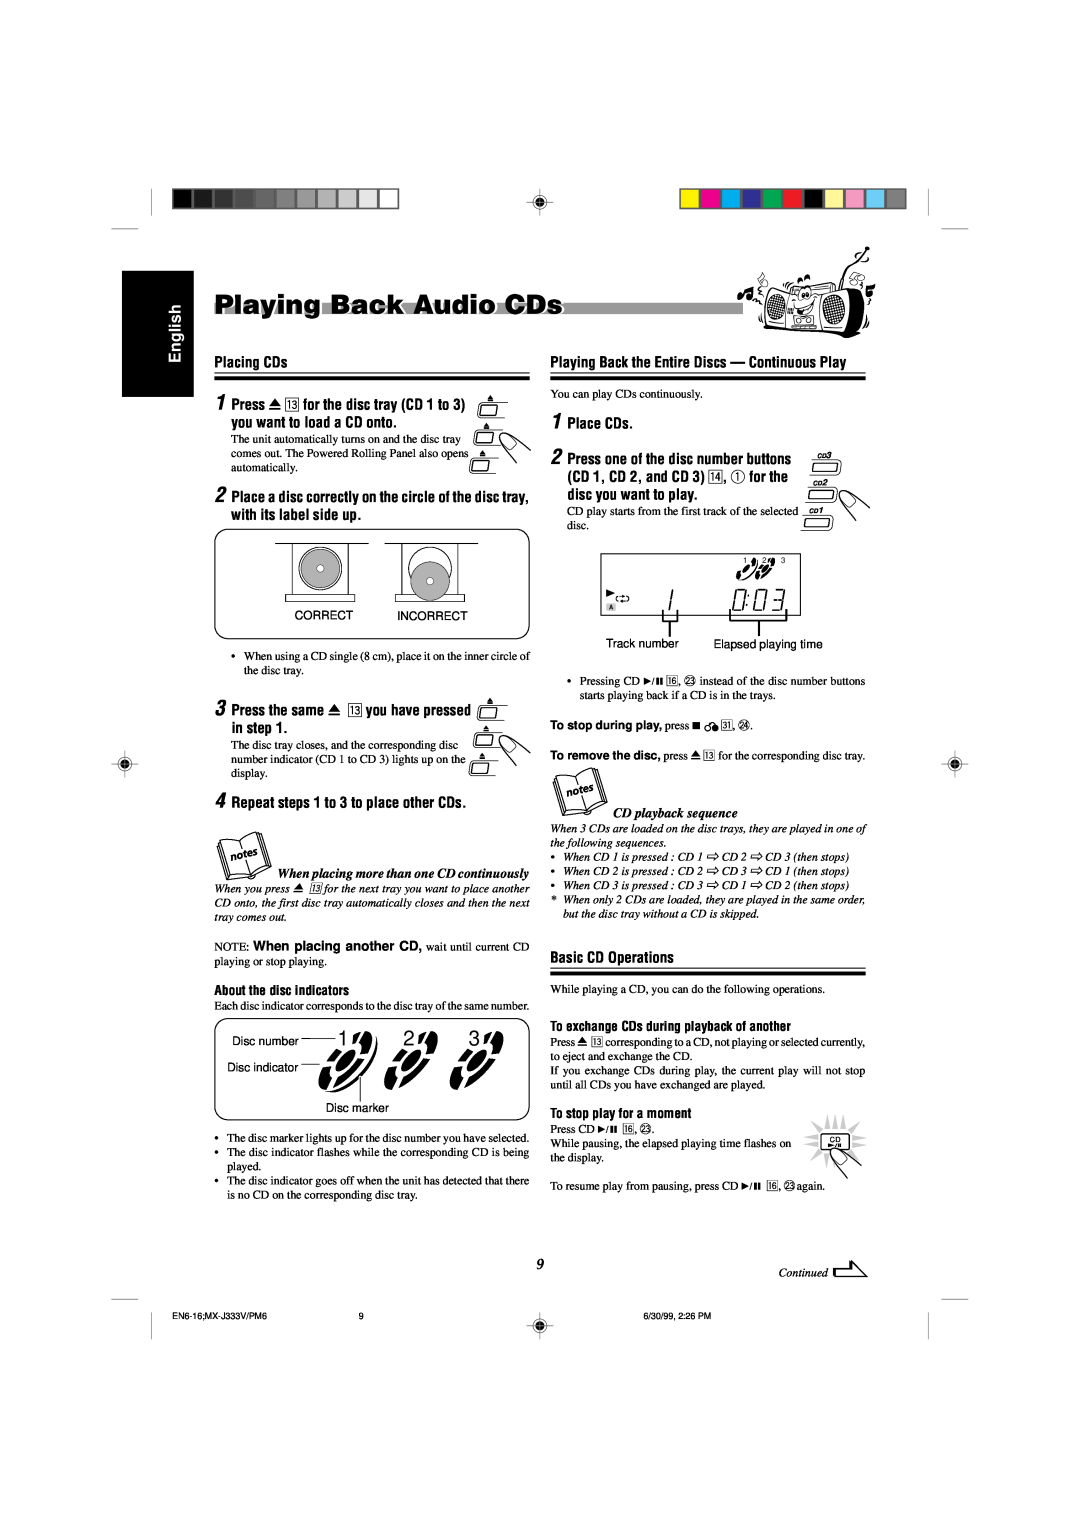 JVC MX-J333VU manual Playing Back Audio CDs, English, Placing CDs, Press the same 0 e you have pressed in step, Place CDs 